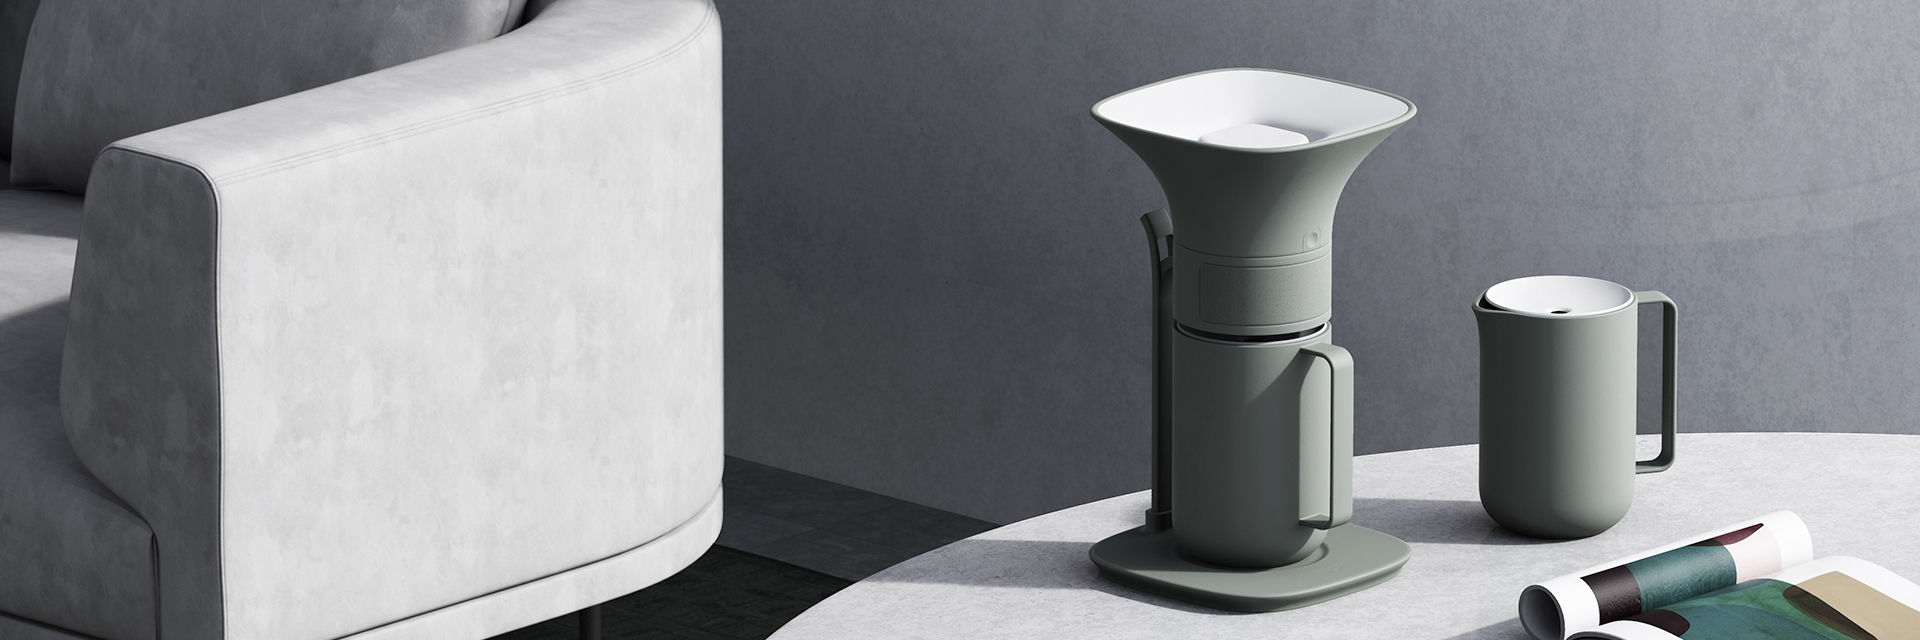 A render of a grey coffee maker in context. 